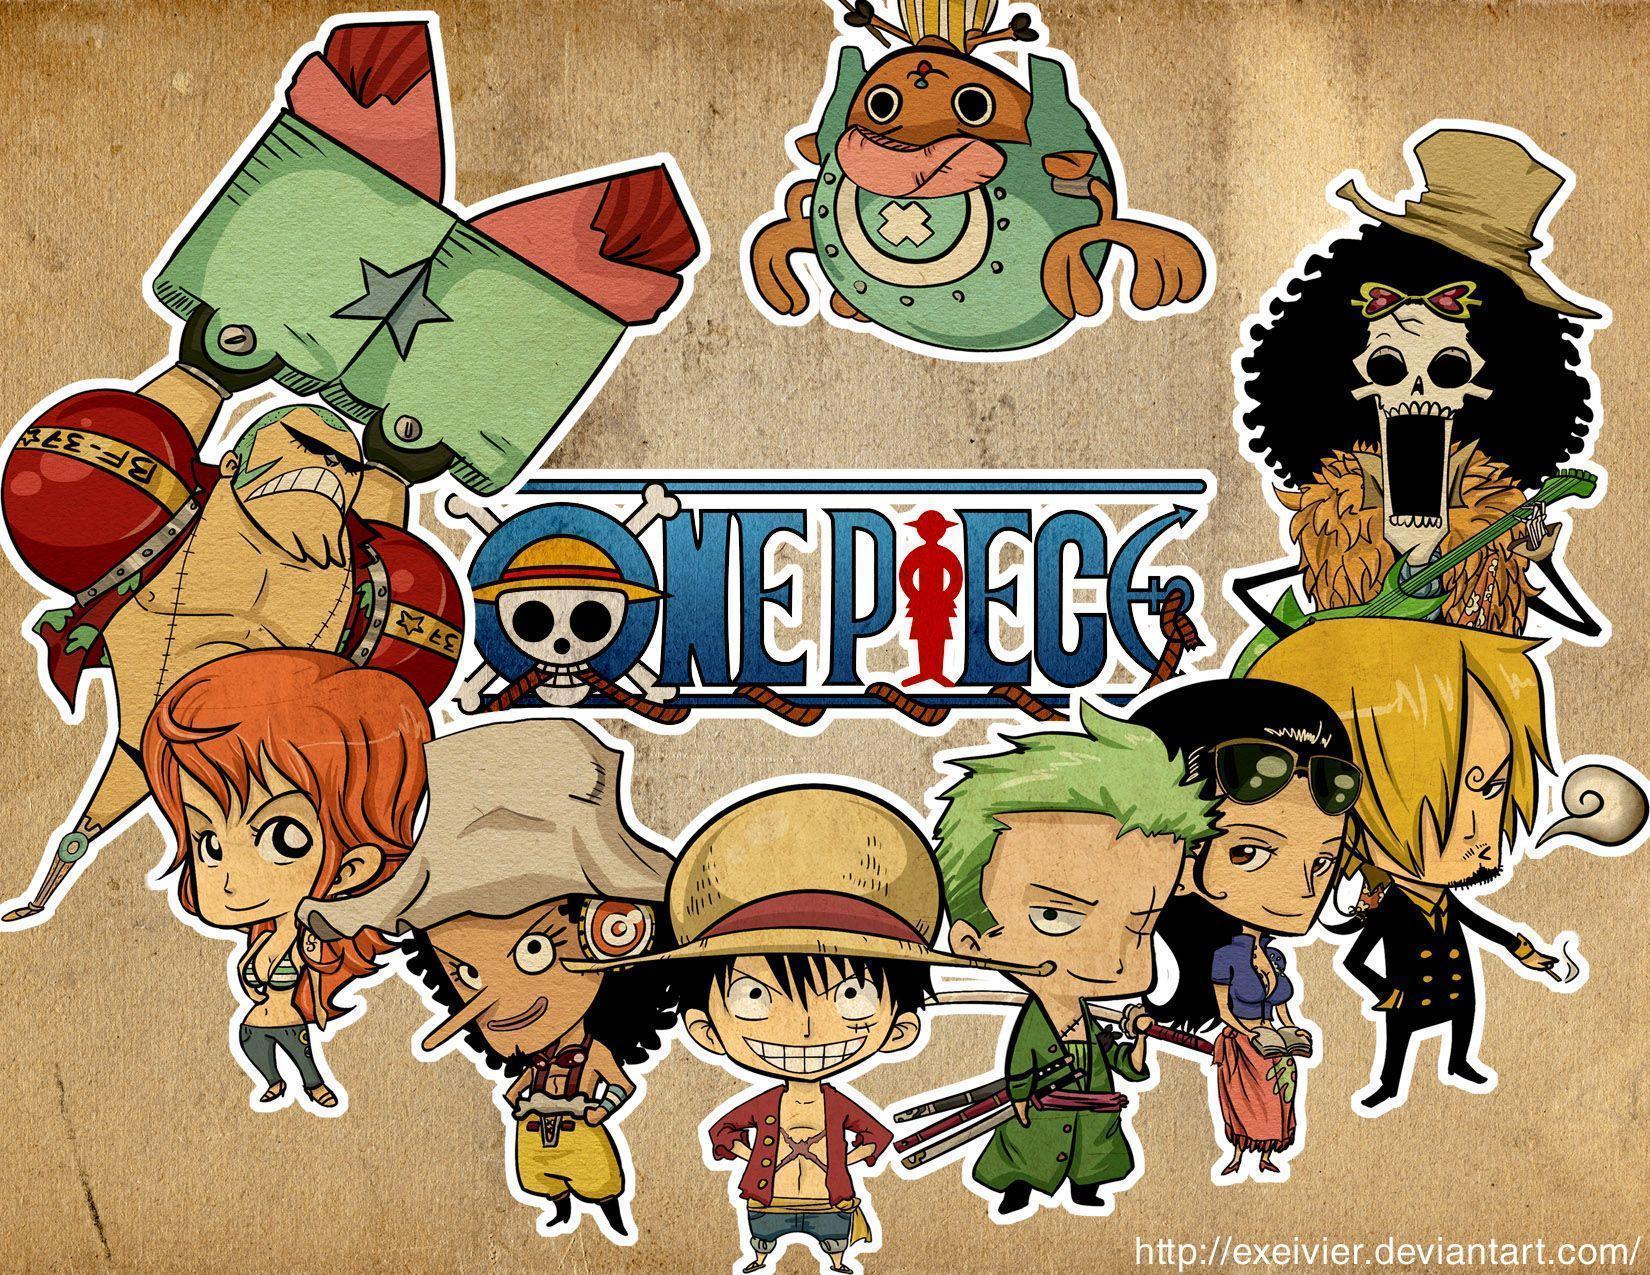 best image about One Piece. Logos, Anime